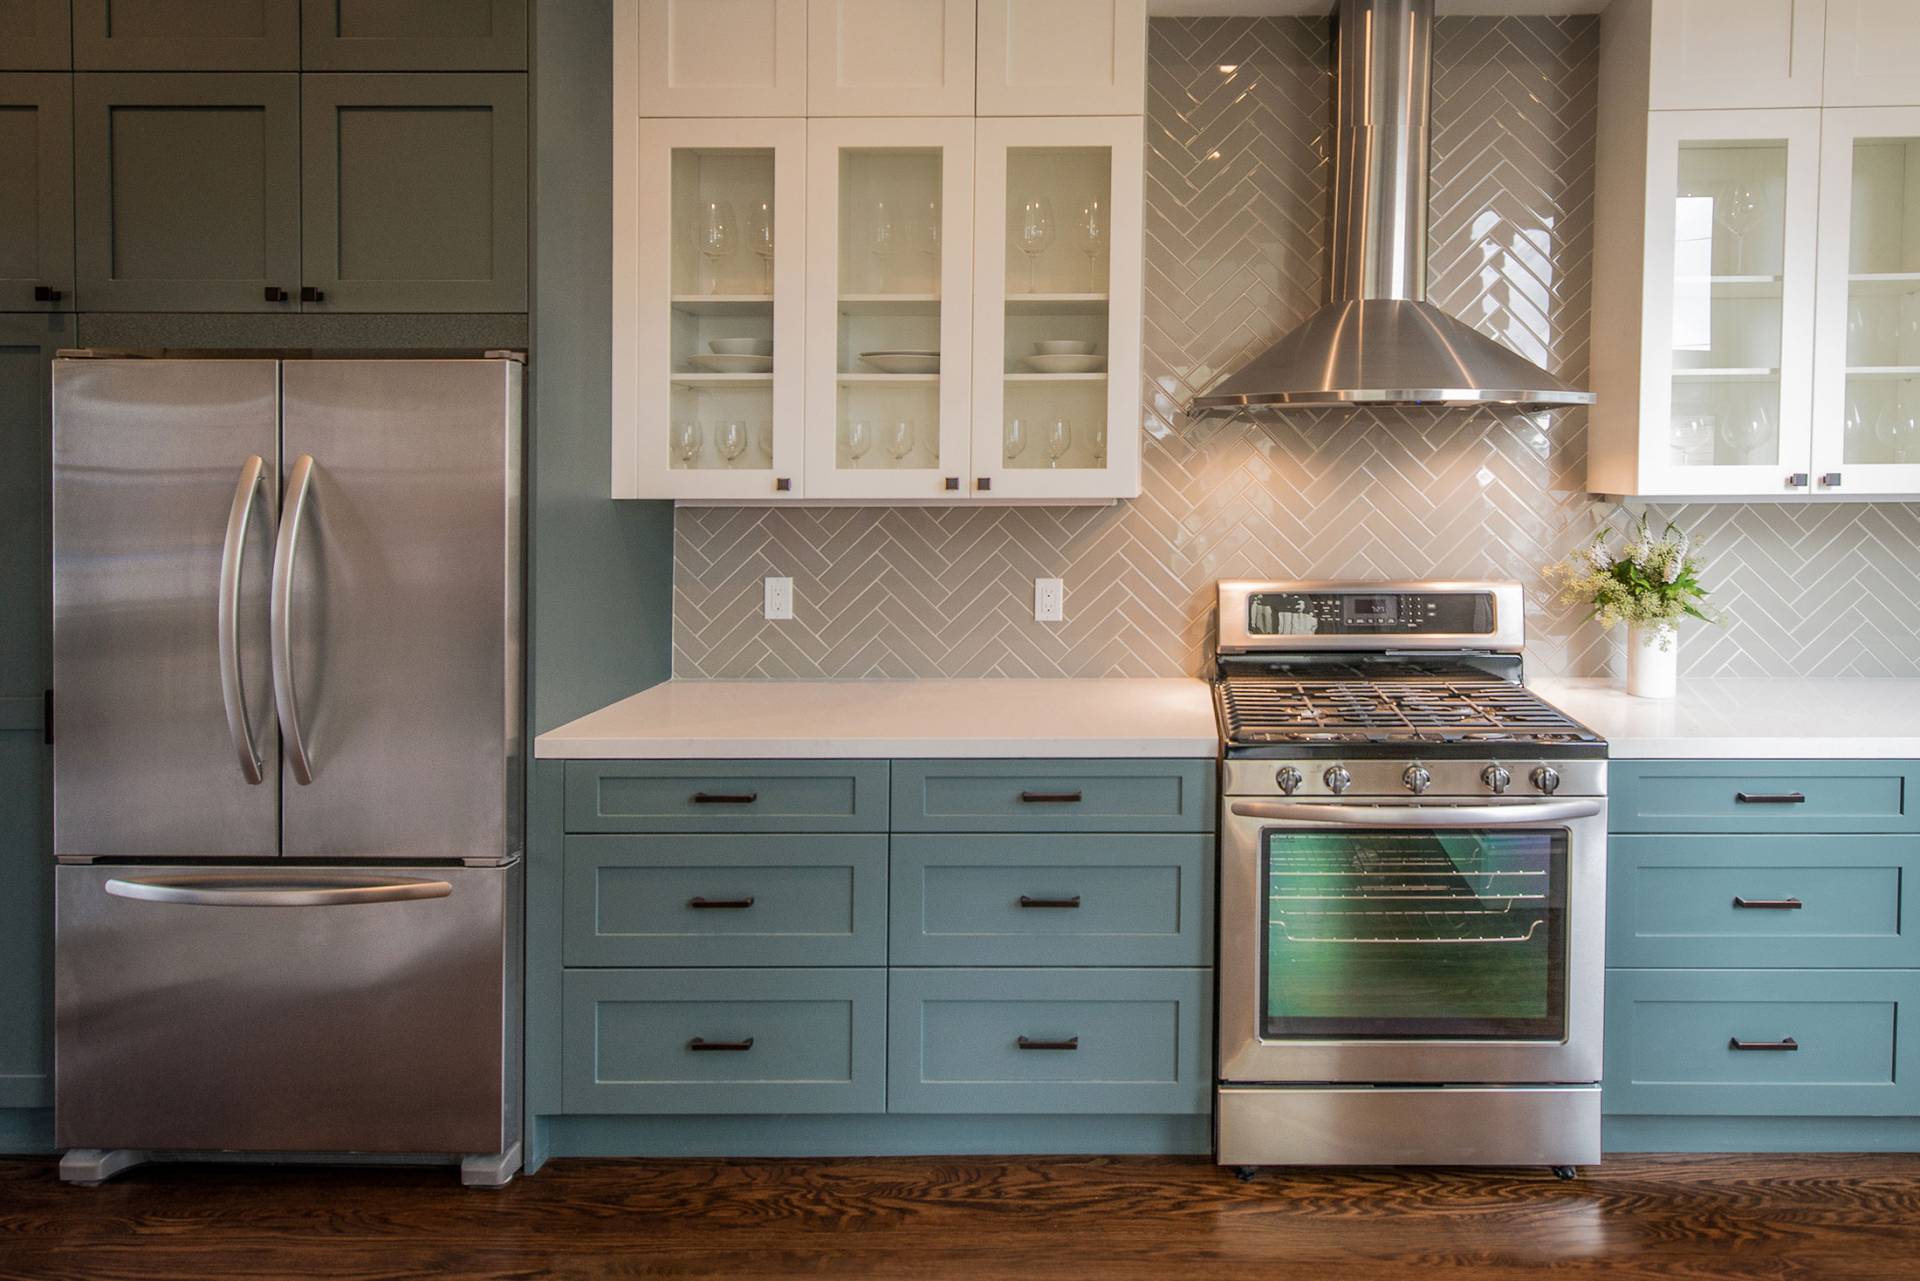 5 Kitchen Cabinet Colors That Are Big, What Is A Good Color For Kitchen Cabinets